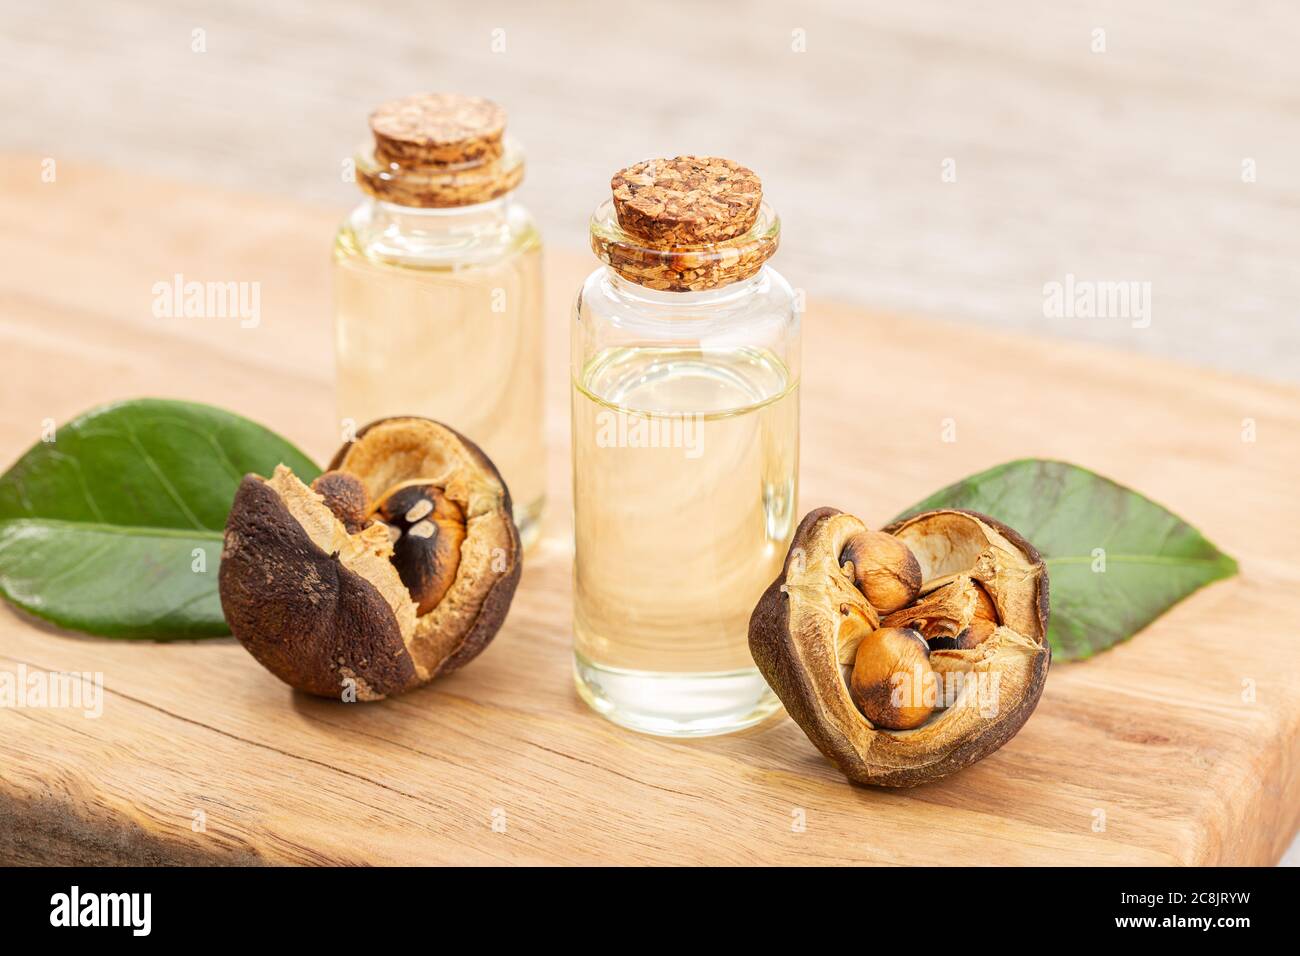 Camellia essential oil bottle and camellia seeds on wooden table. Beauty, skin care, wellness Stock Photo